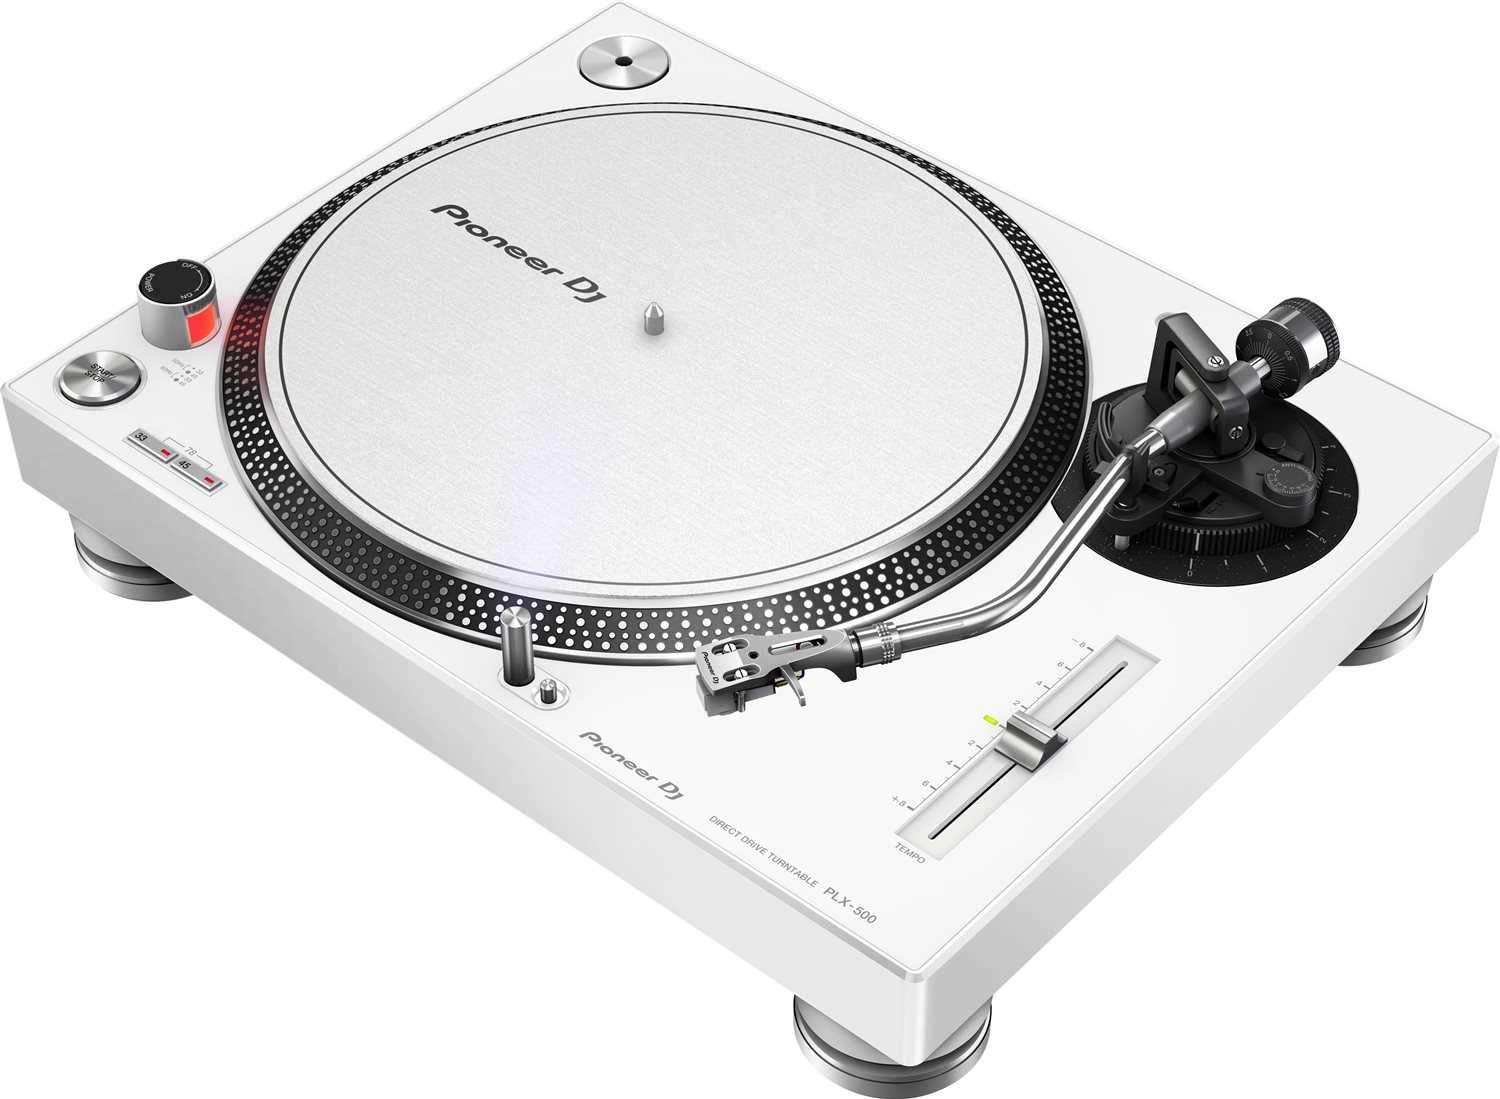 Pioneer PLX-500-W Direct Drive DJ Turntable Pair - ProSound and Stage Lighting